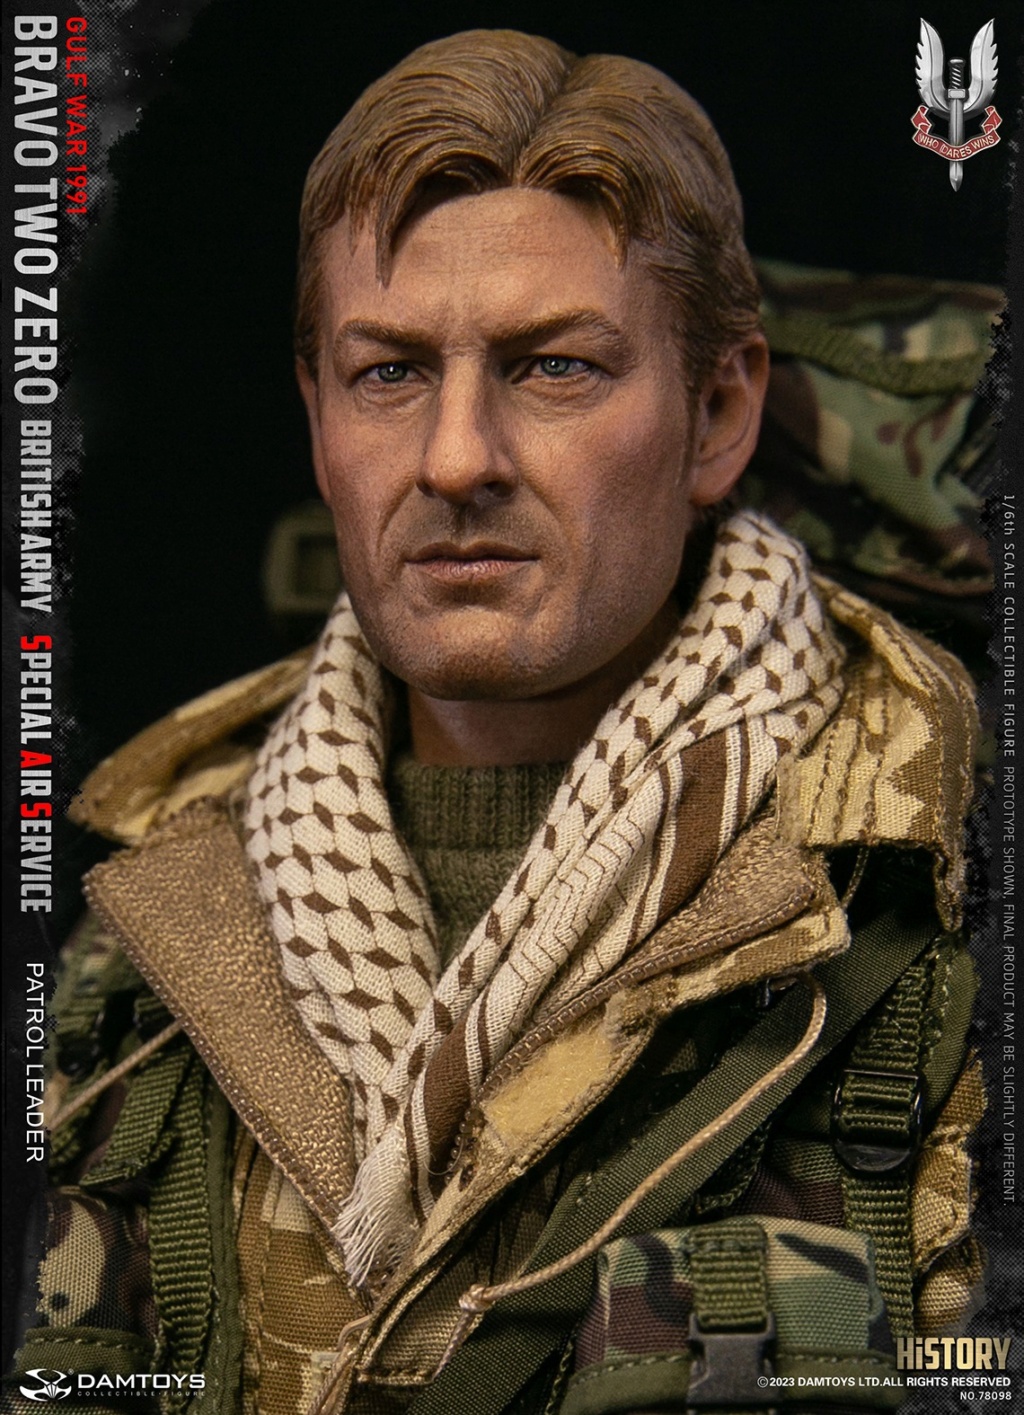 ArmySpecialAirService - NEW PRODUCT: DAM Toys: 1/6 scale BRITISH ARMY SPECIAL AIR SERVICE (SAS) PATROL LEADER 10593010